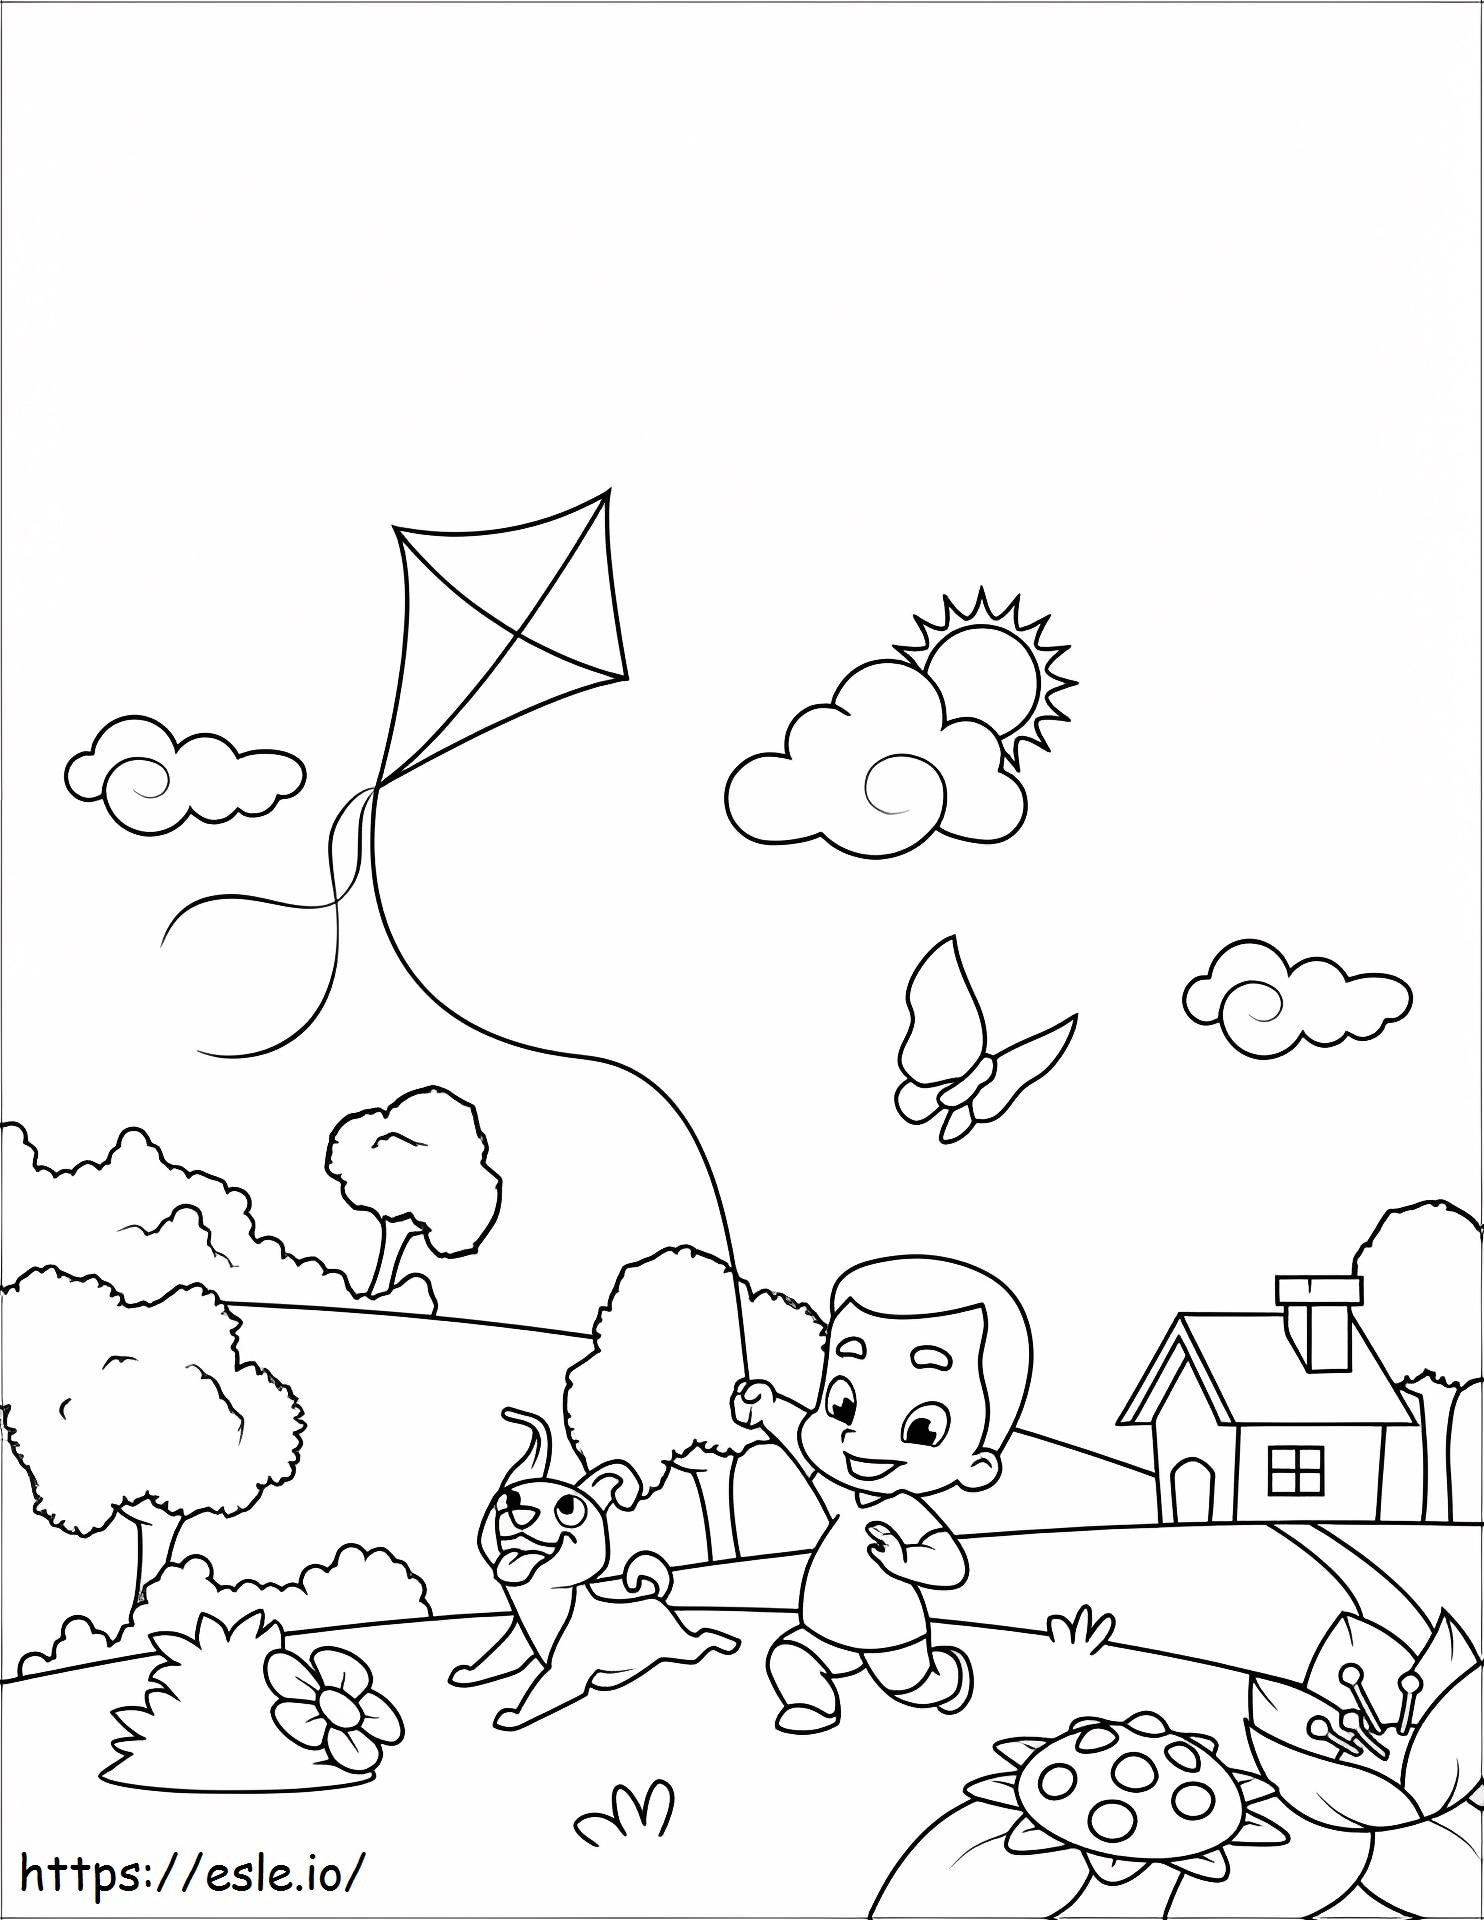 1533009802 Little Boy Flying A Kite A4 coloring page